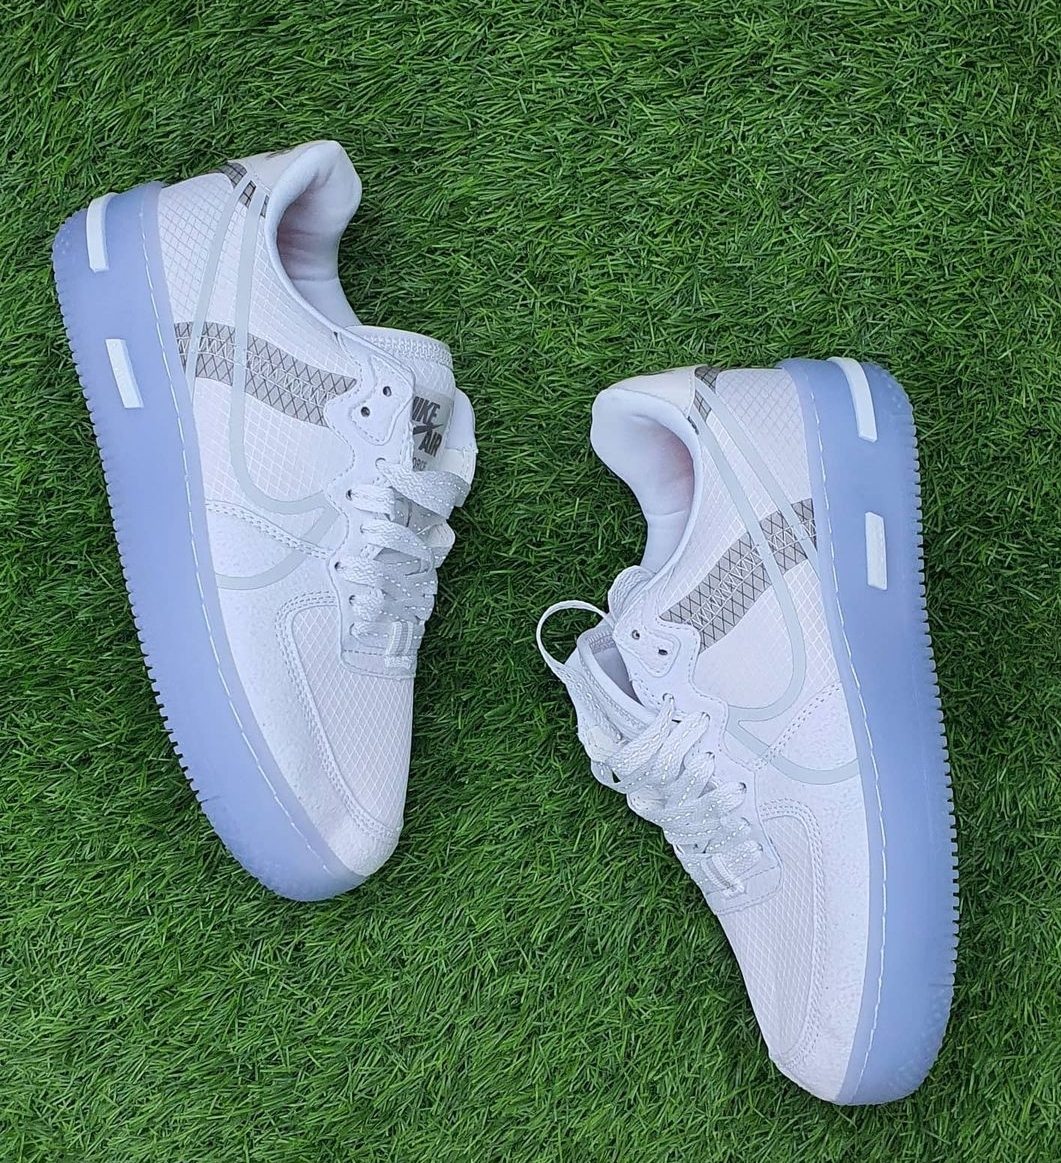 Air Force 1 Ice White Deals Outlet, Save 48% | jlcatj.gob.mx